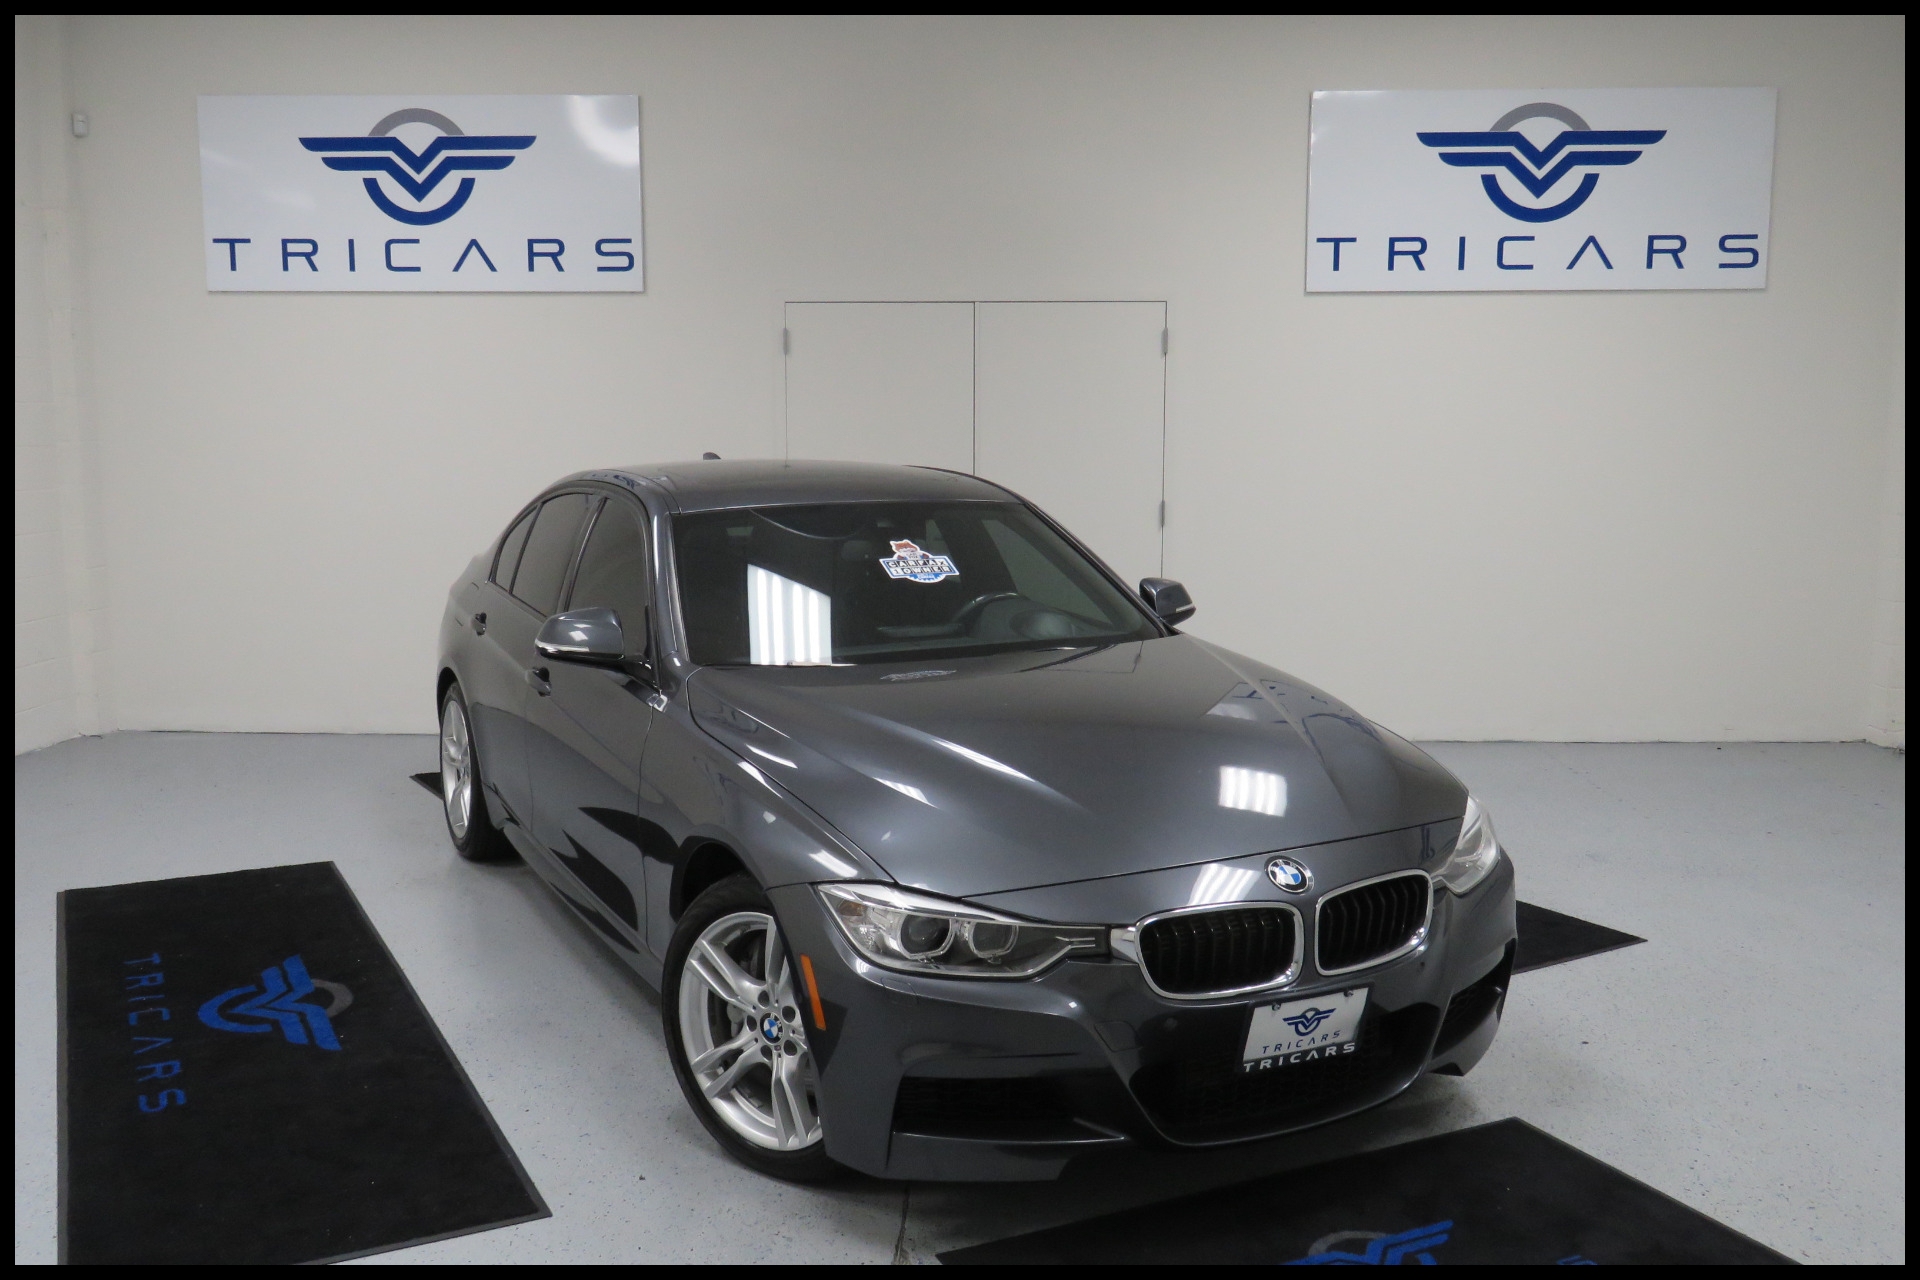 Bmw Dealers In Md 2014 Bmw 3 Series 335i Xdrive M Sport Stock R for Sale